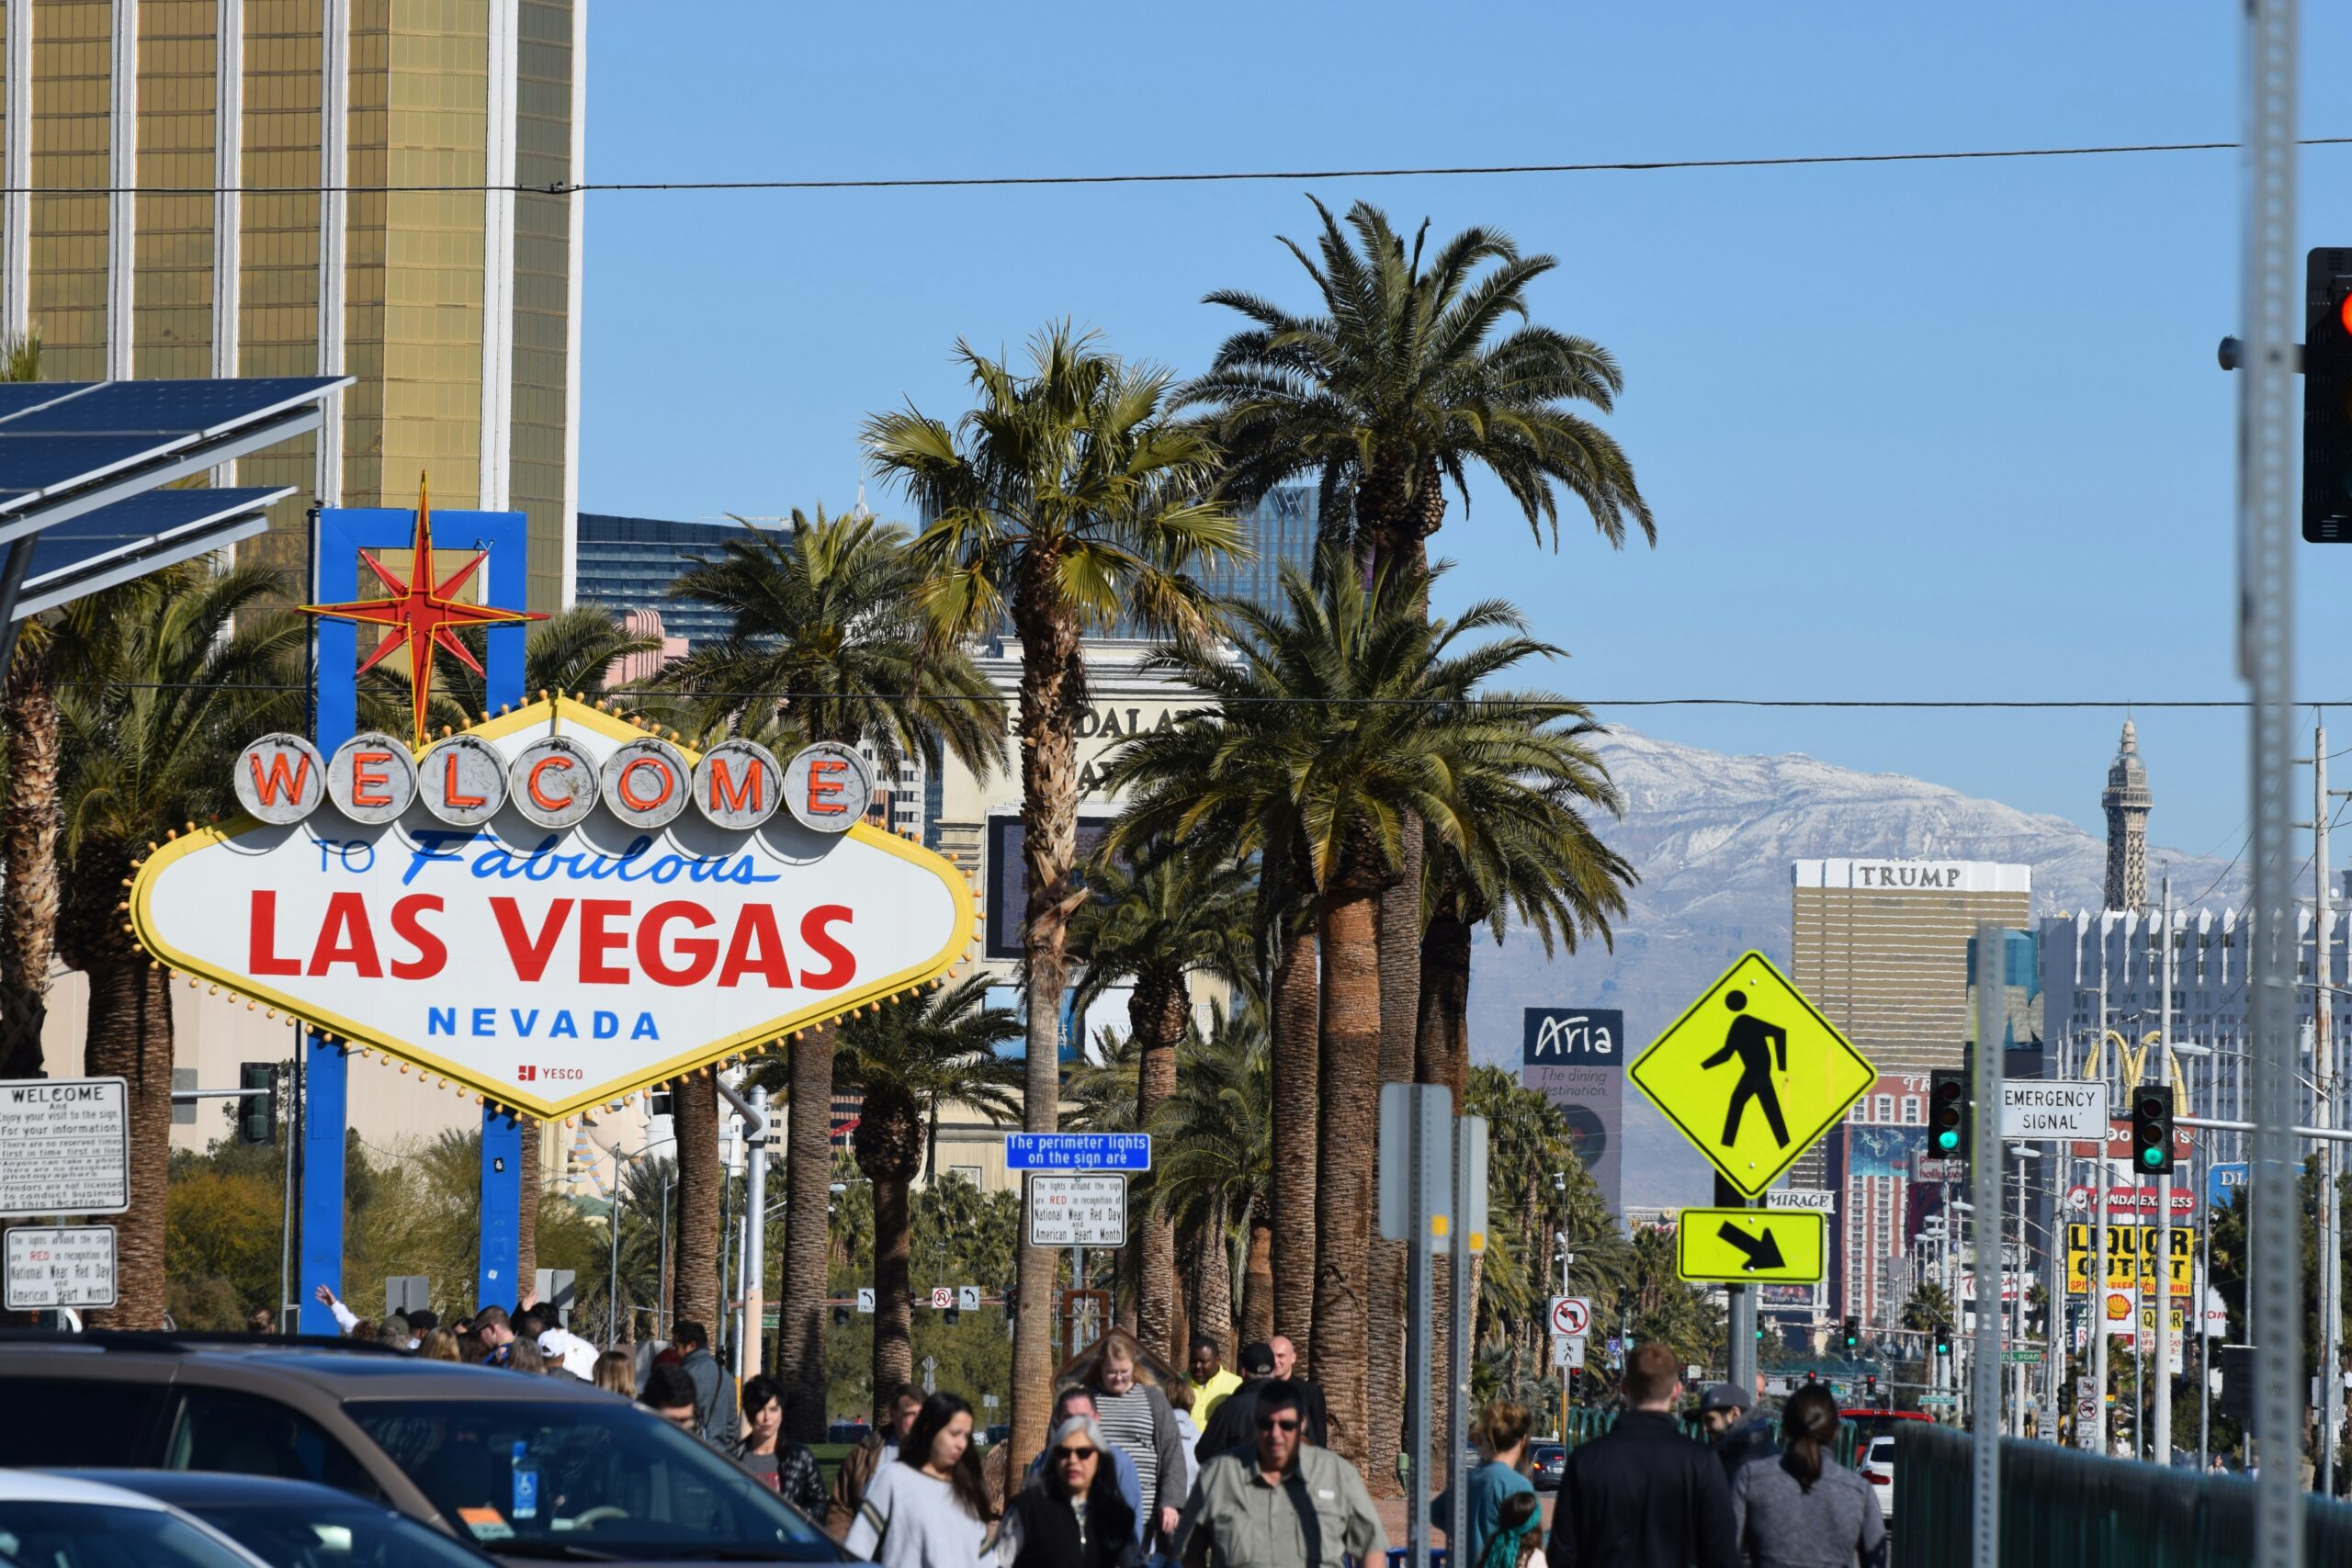 These hotels have mature themes that travelers will love.
pictured: a Las Vegas welcome sign on a bright blue day